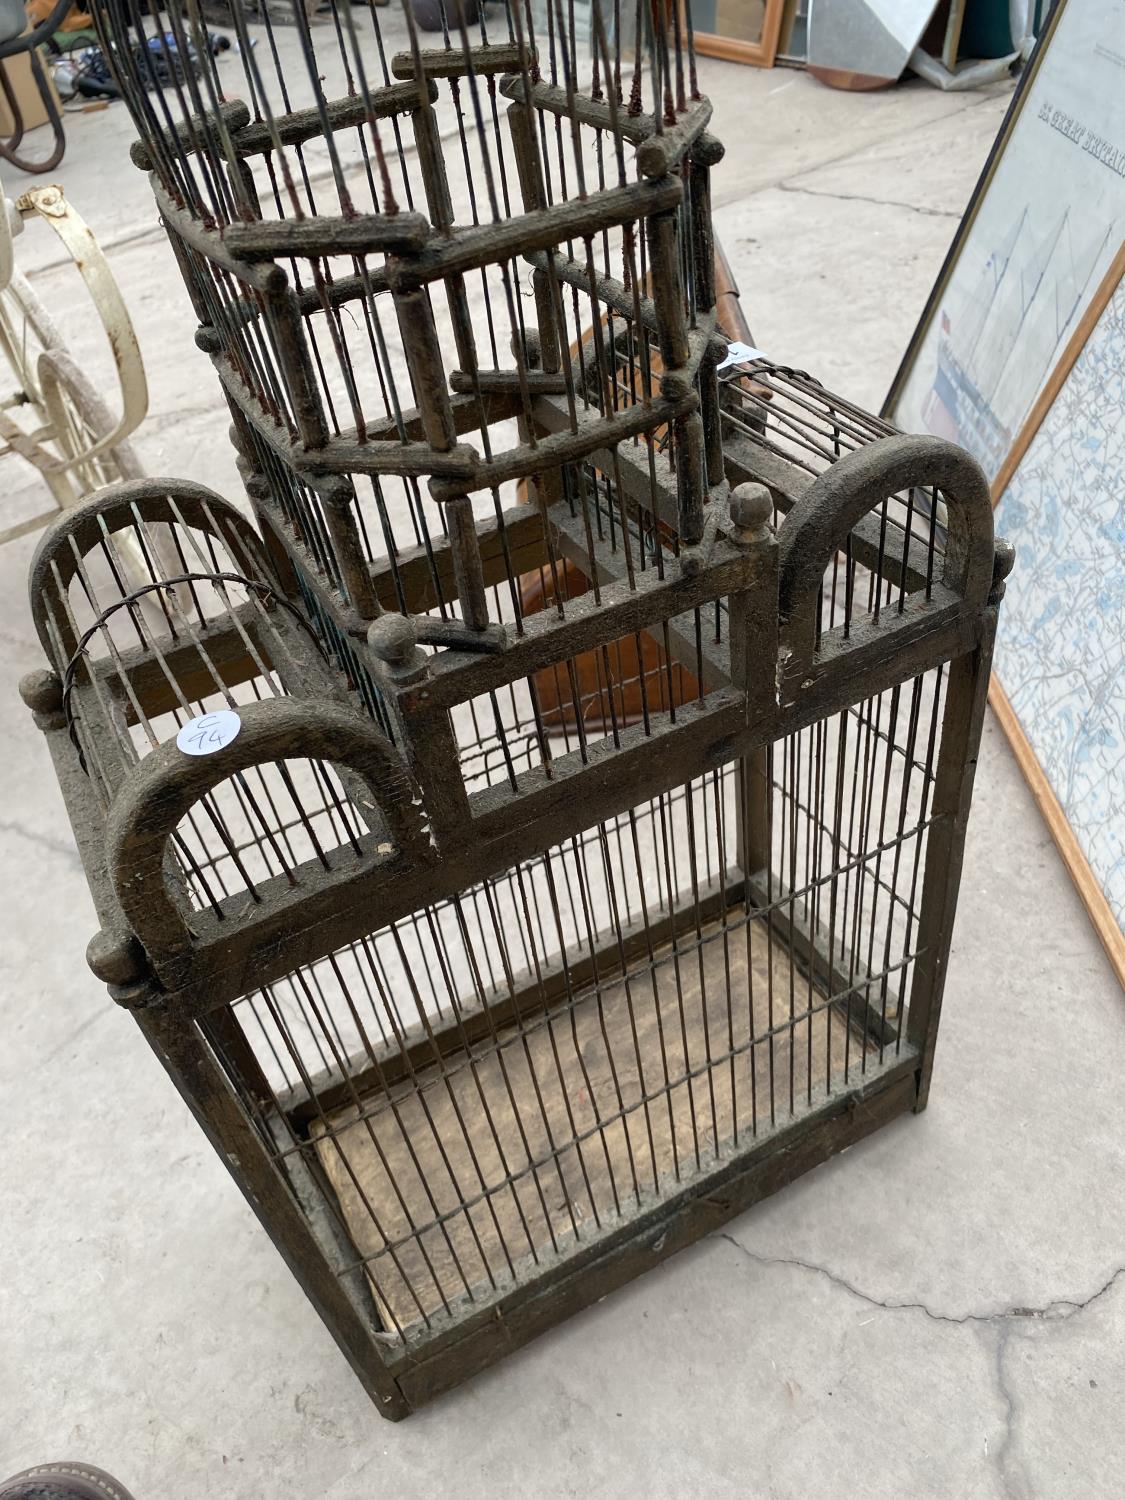 A VINTAGE AND DECORATIVE BIRD CAGE - Image 3 of 3